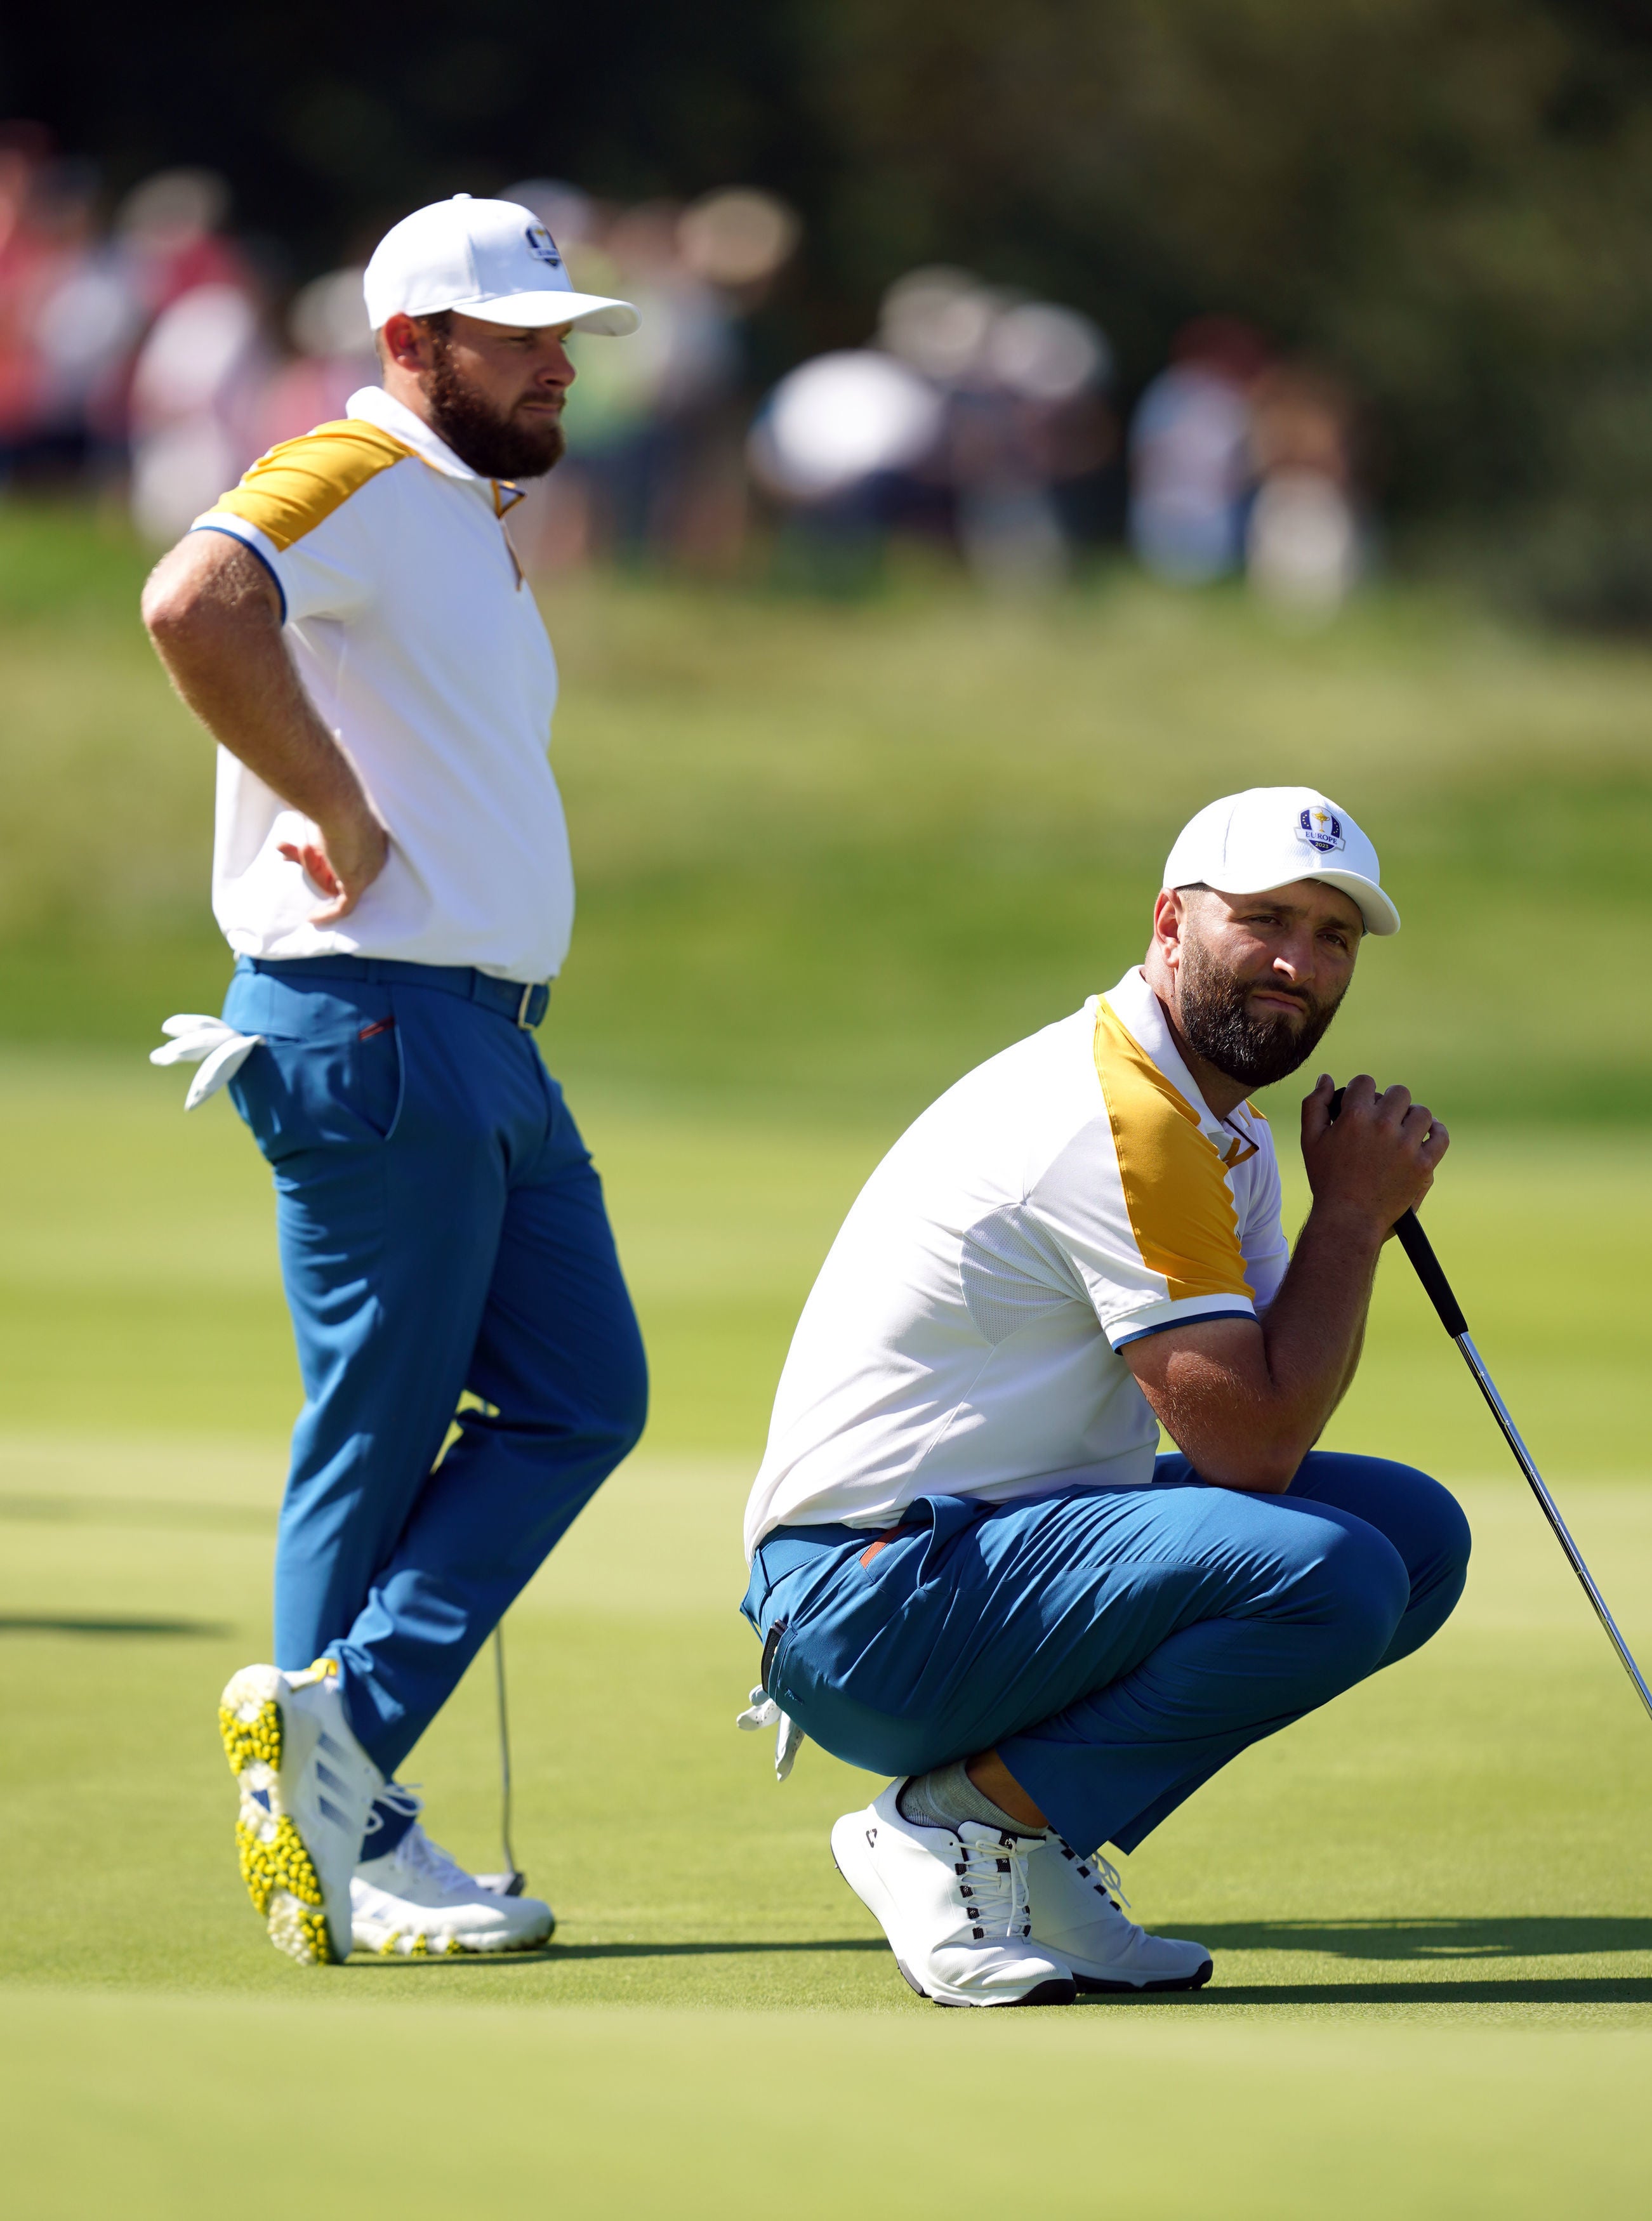 Tyrrell Hatton and Jon Rahm provide theatre on the course with their ‘passion’